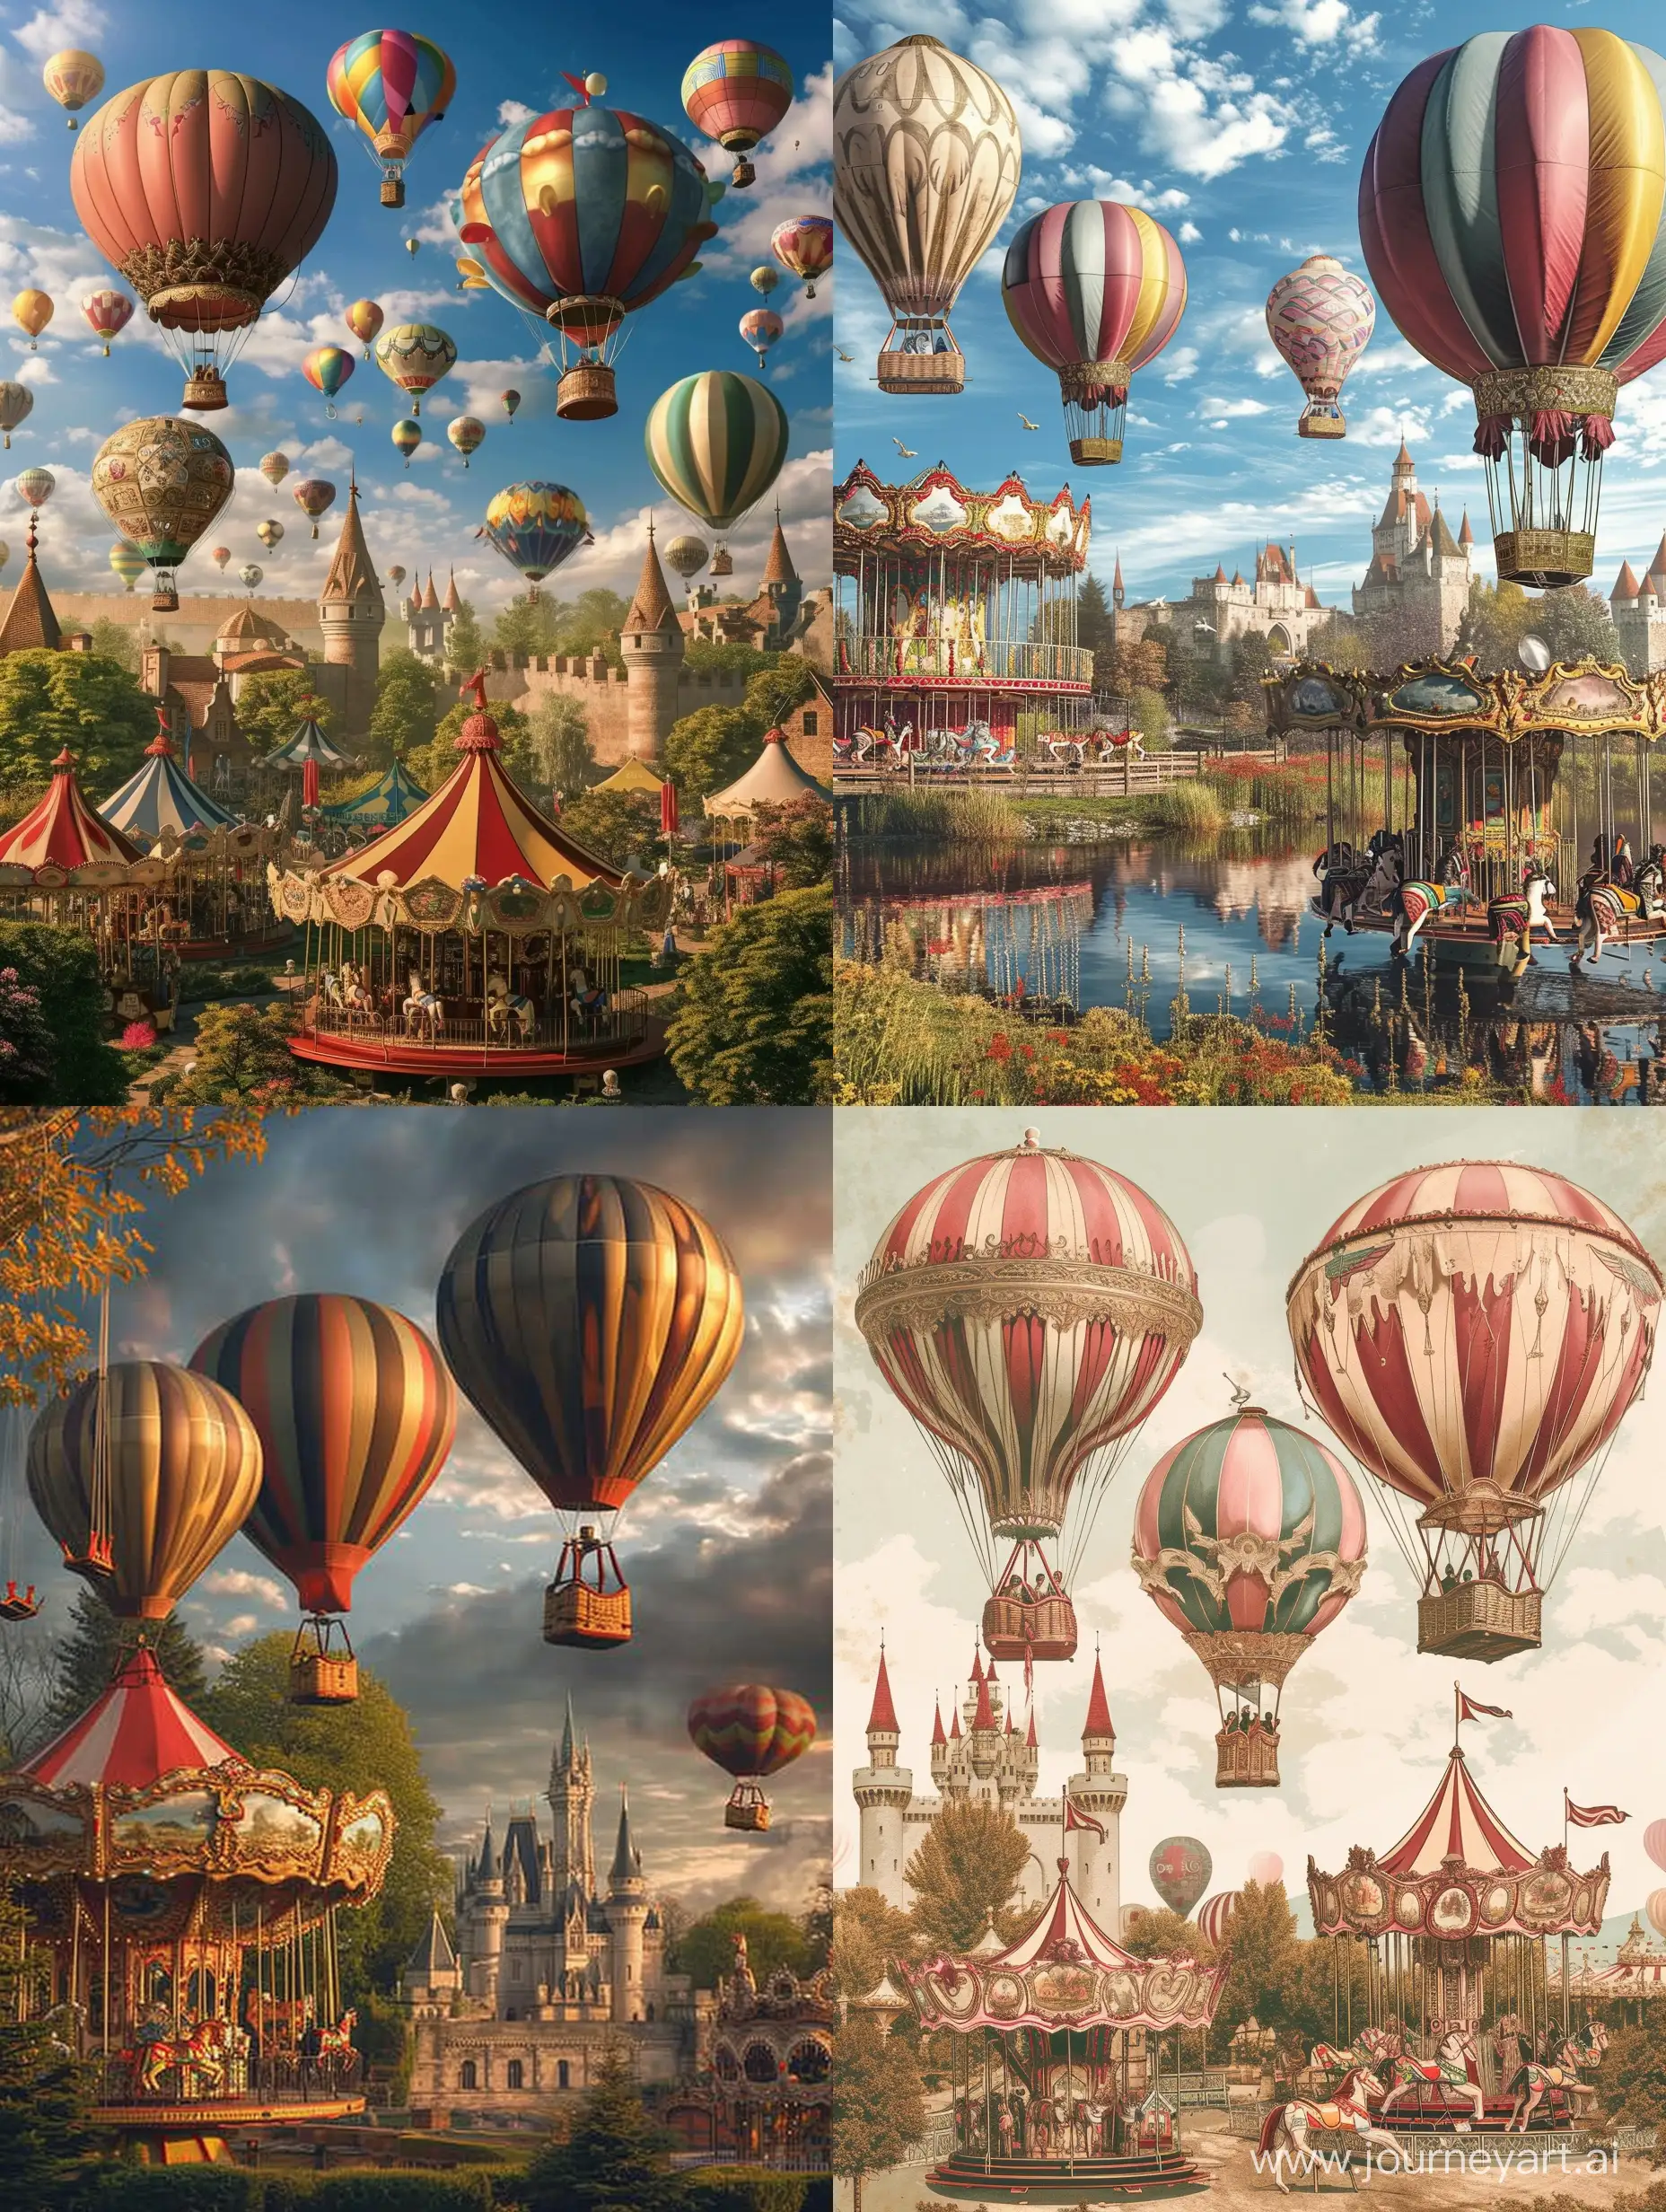 Enchanting-Amusement-Park-Scene-with-Hot-Air-Balloons-and-Carousel